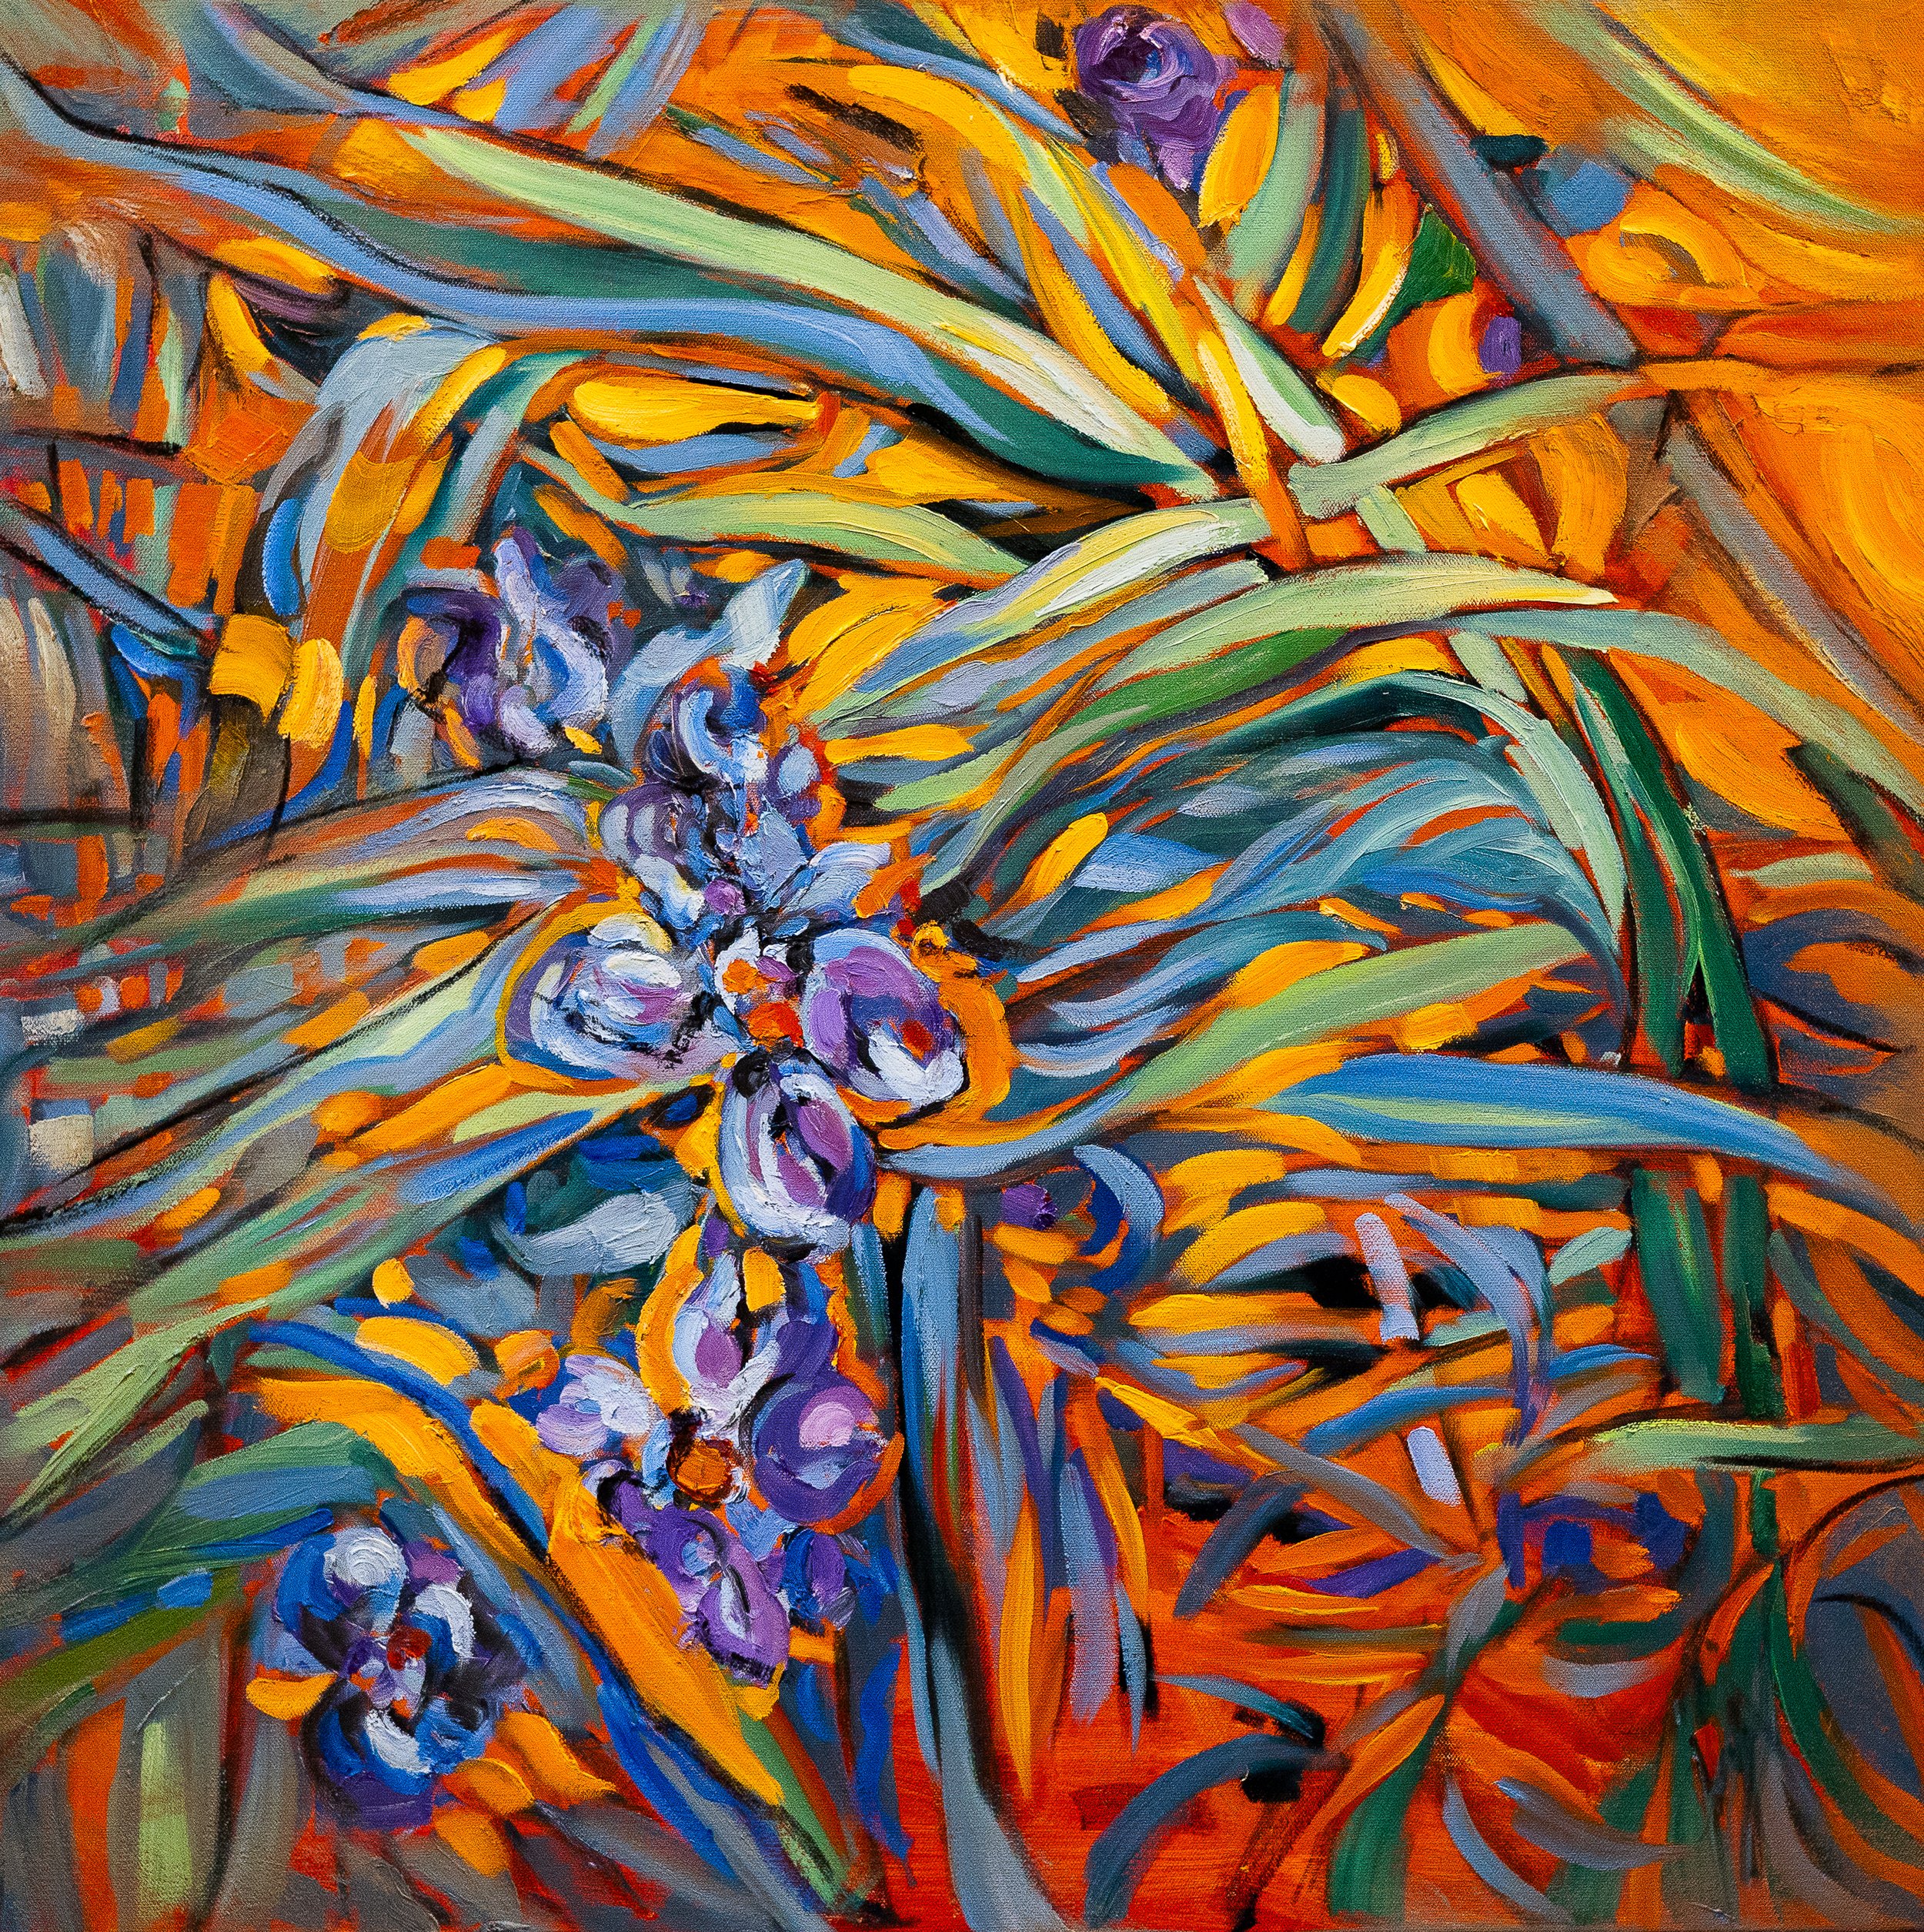   Blades of Color    30" x 30"   Oil on canvas  